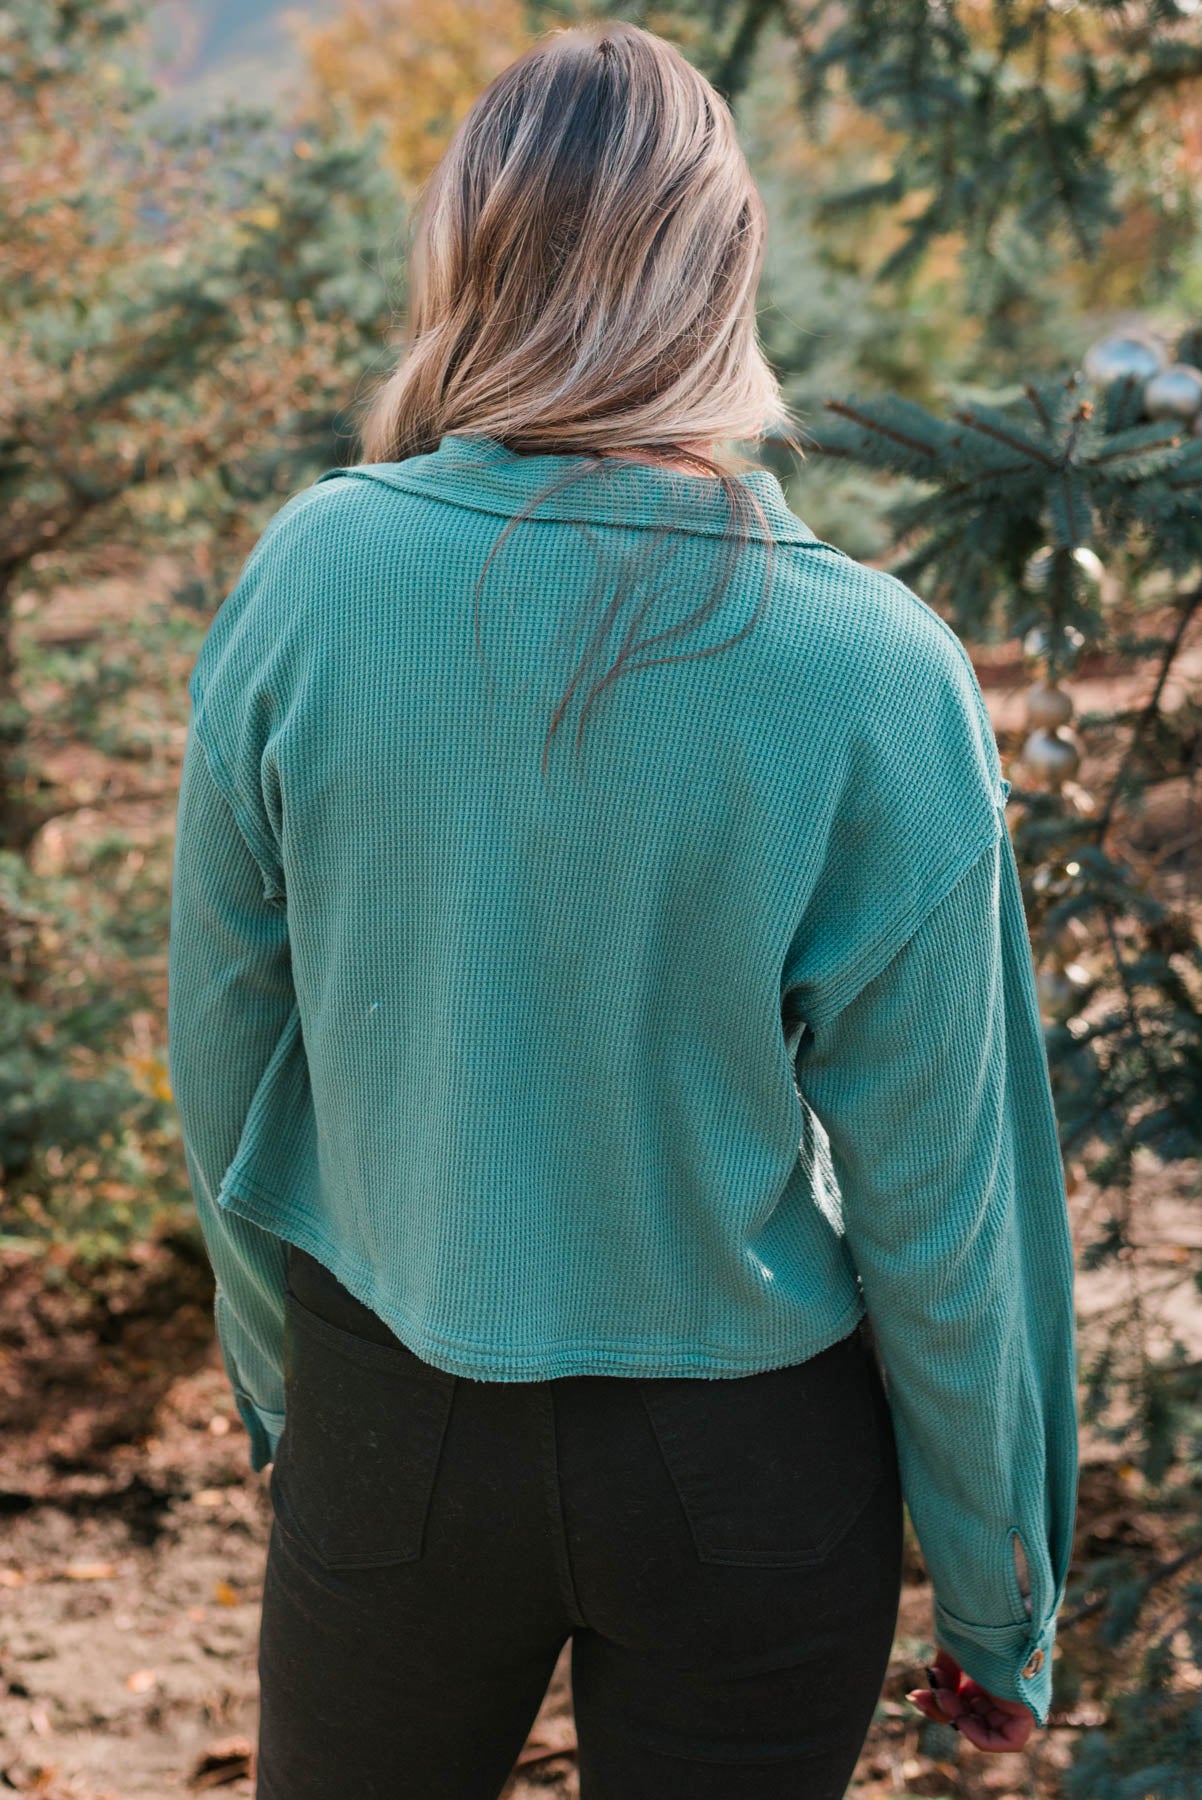 Back view of the hunter green top